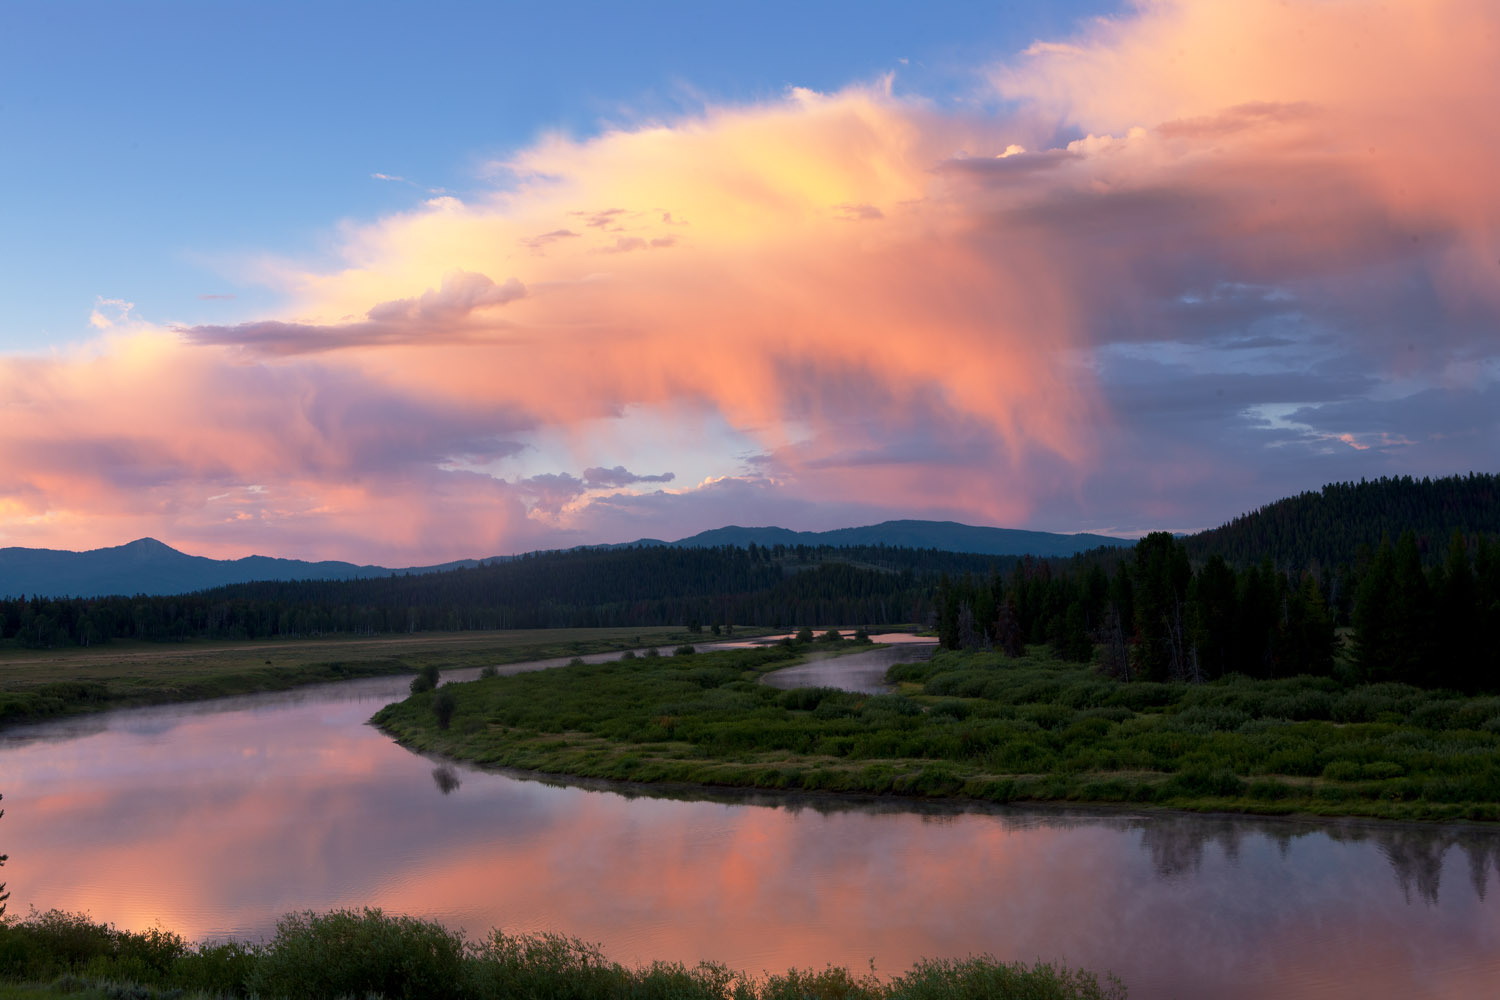 For fewer than 5 minutes a brilliant sky illuminates the pre-dawn along the Oxbow Bend.&nbsp;